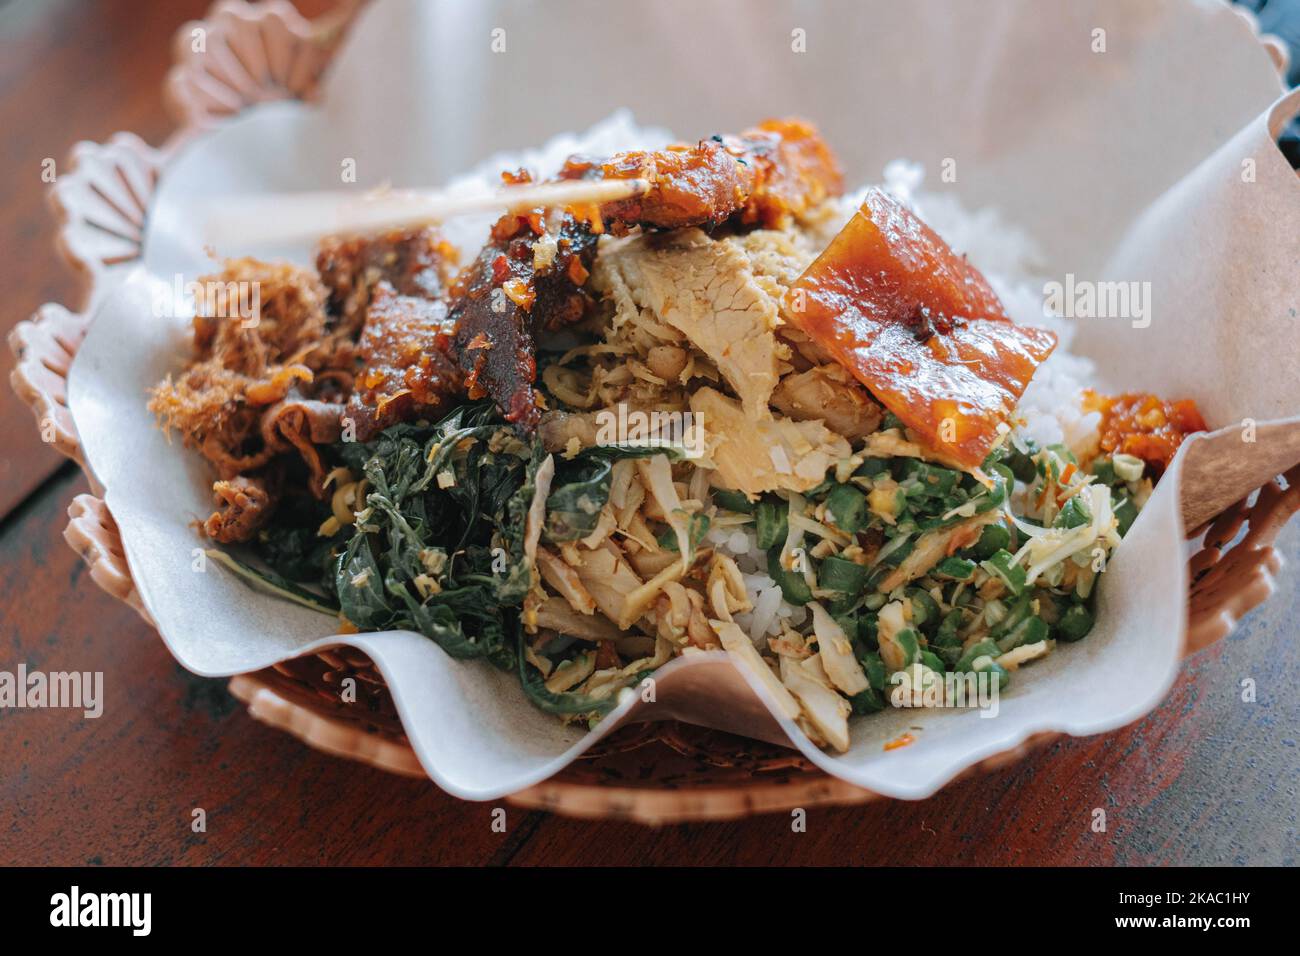 A plate of Balinese typical food called nasi babi guling or pork roll with rice in English, specialty consisting of pork meat, pork belly, pork skin, Stock Photo